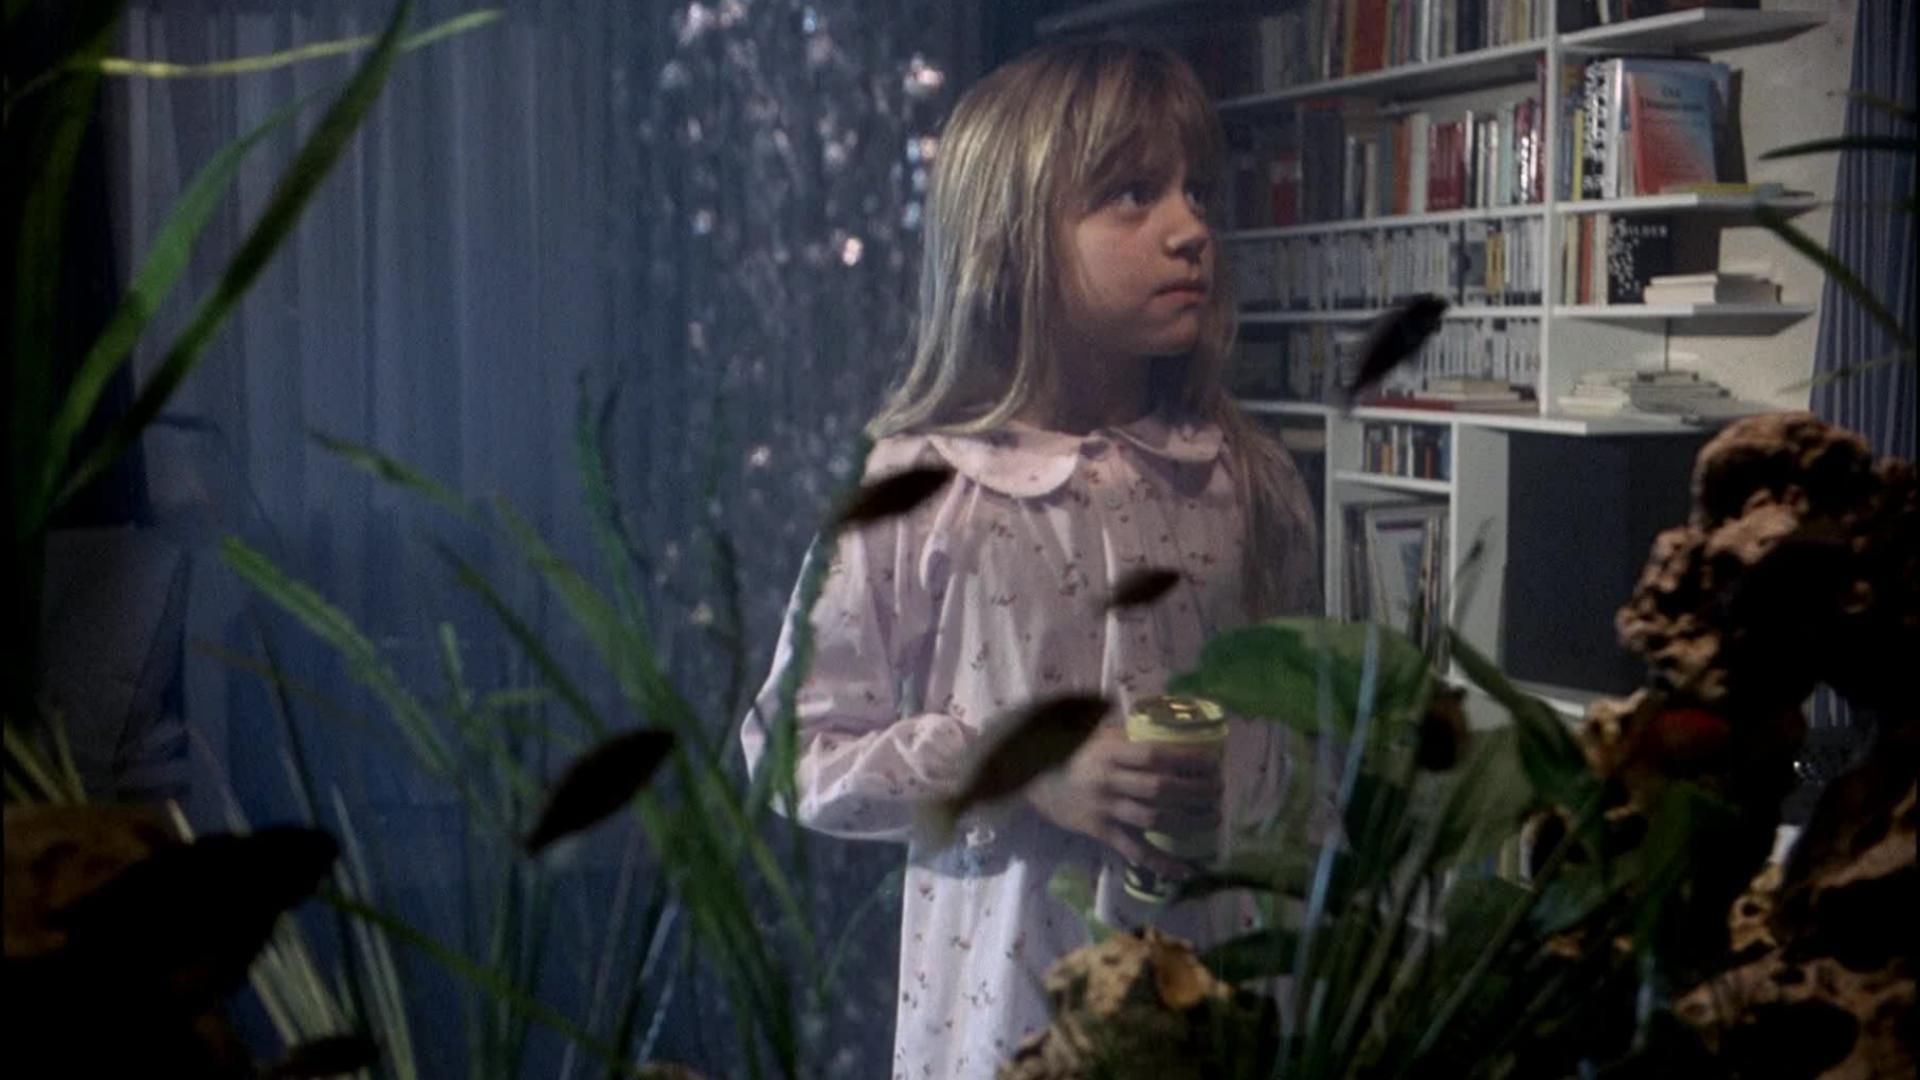 Still from the 1989 Michael Haneke film The Seventh Continent in which Eva is feeding the fish